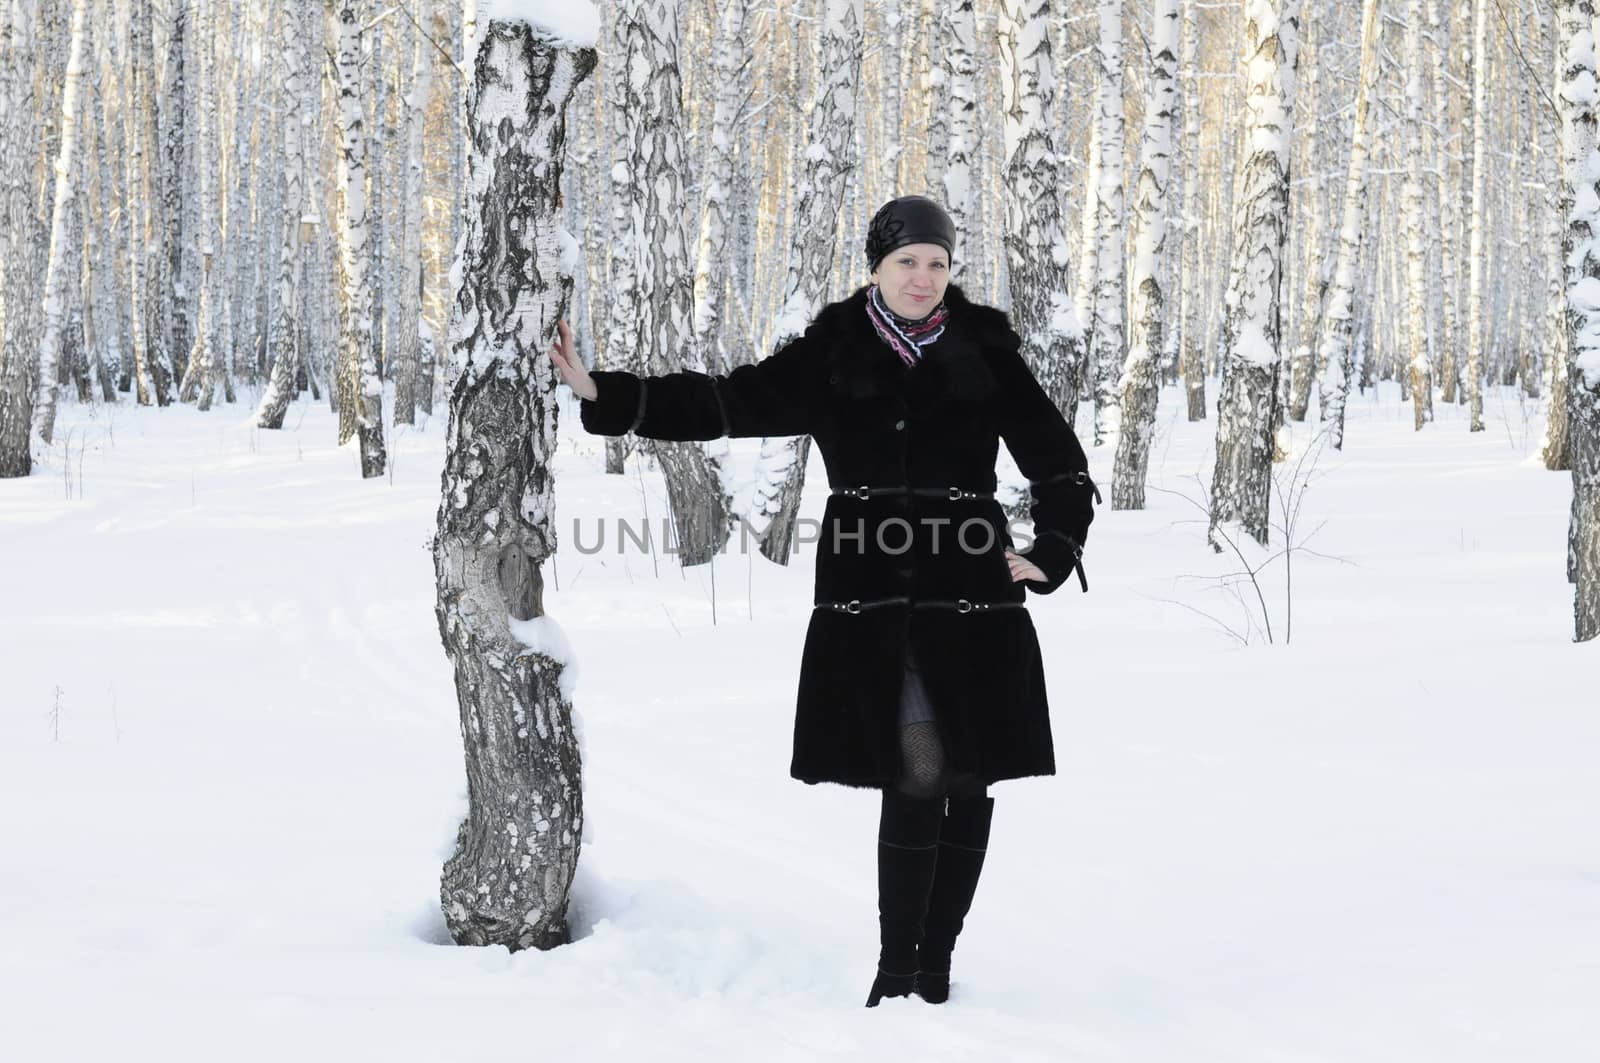 The woman in a black fur coat costs in the birch wood in the win by veronka72